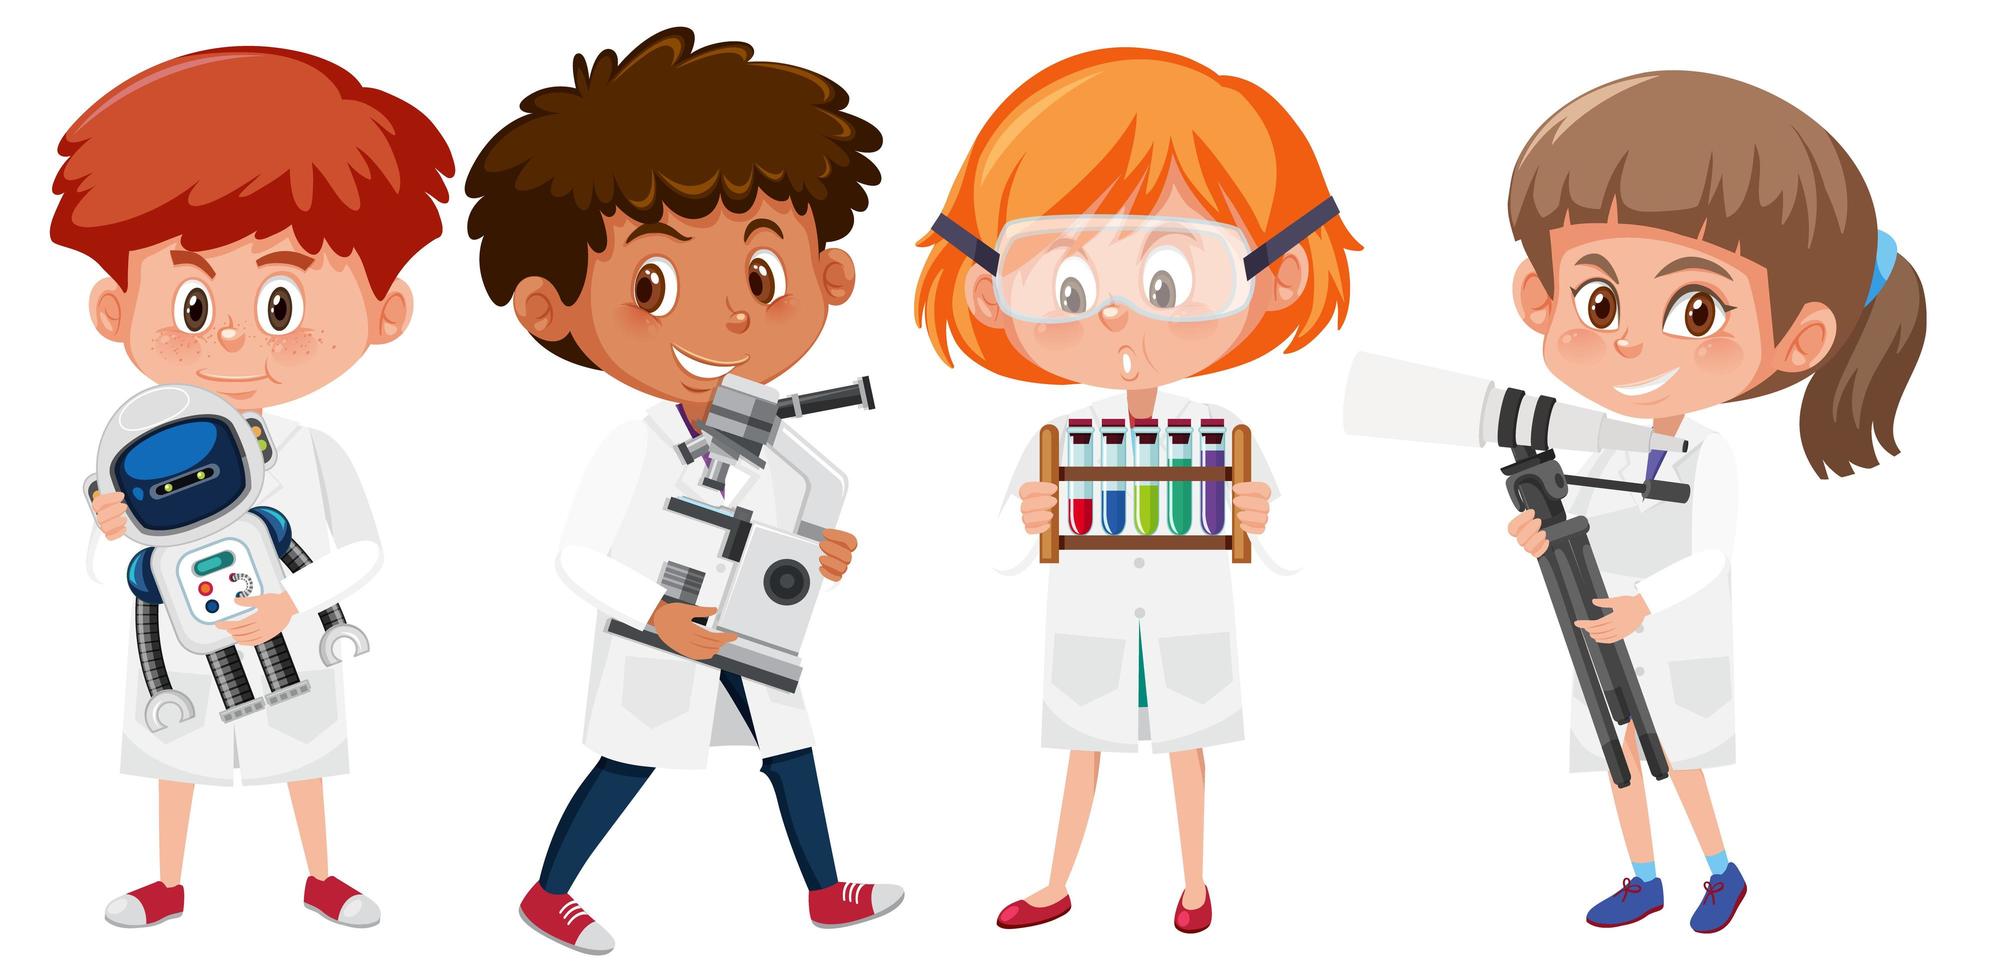 Set of kids in scientist lab coats holding science objects vector